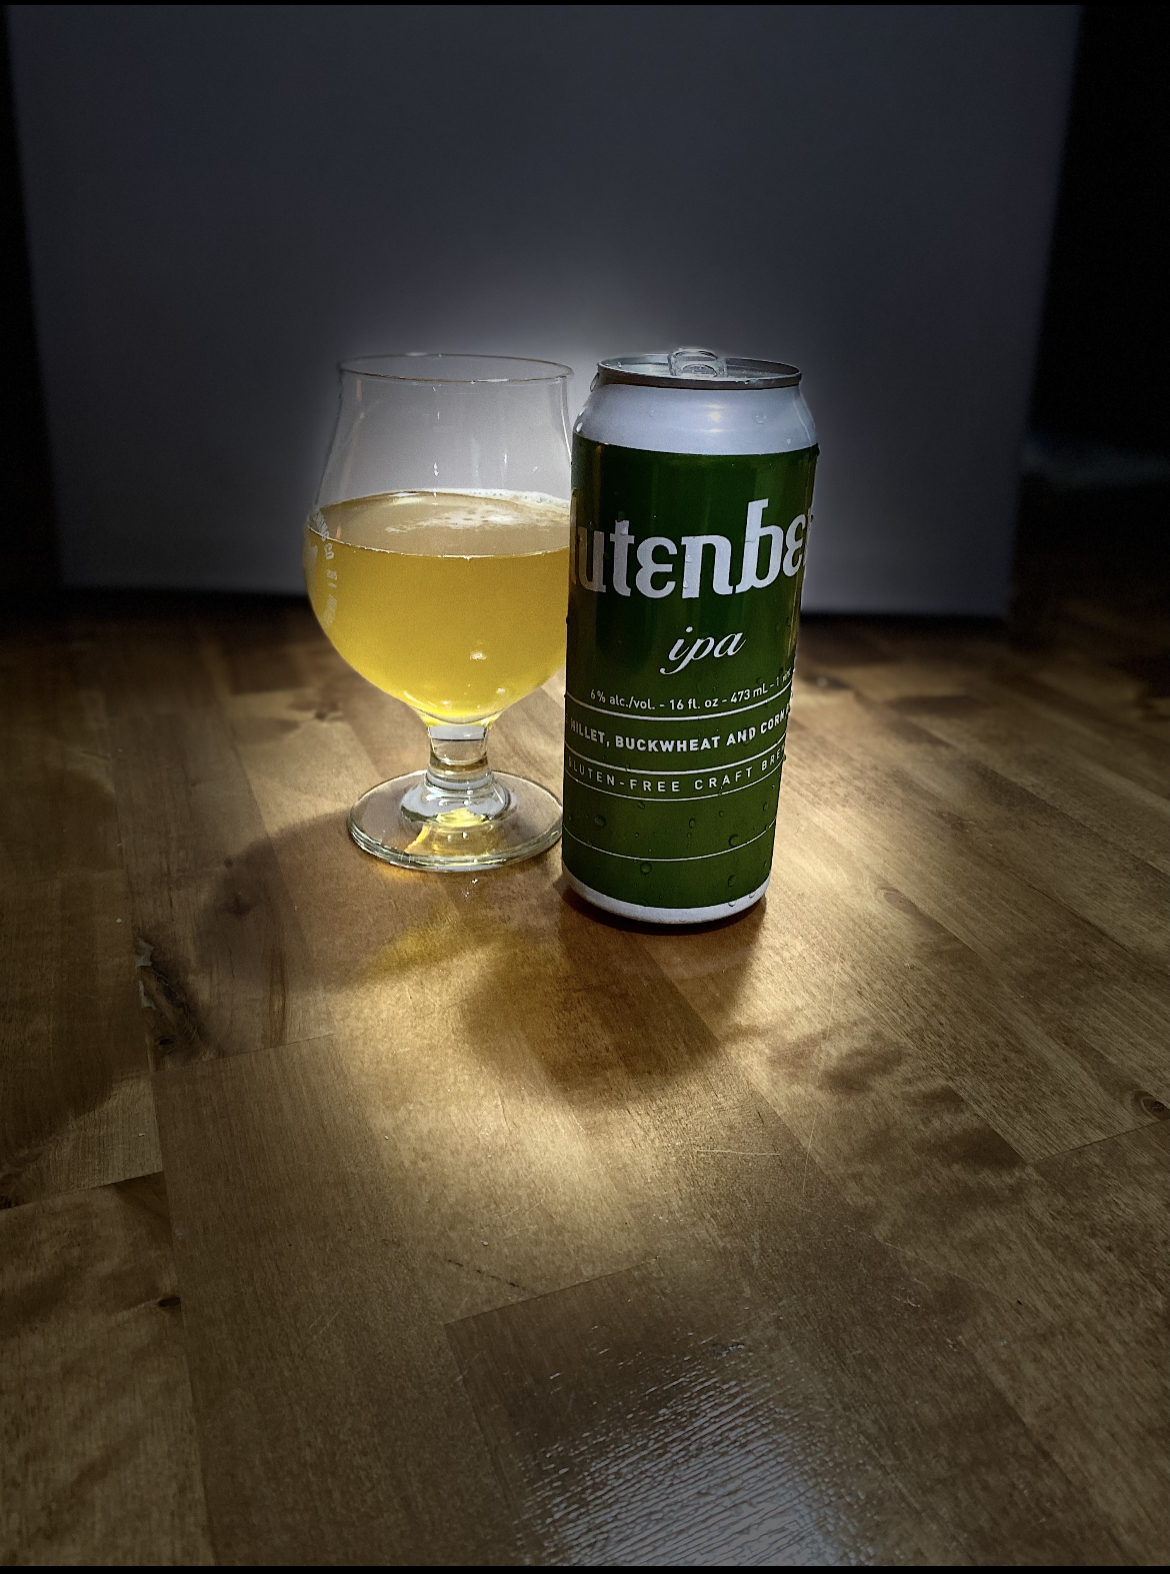 This Glutenberg is Not as full bodied as the gluten based or gluten reduced counterparts but a solid IPA. Fragrant, bitter, and hoppy. At 6% ALC/VOL. by gfbeerlovers.com